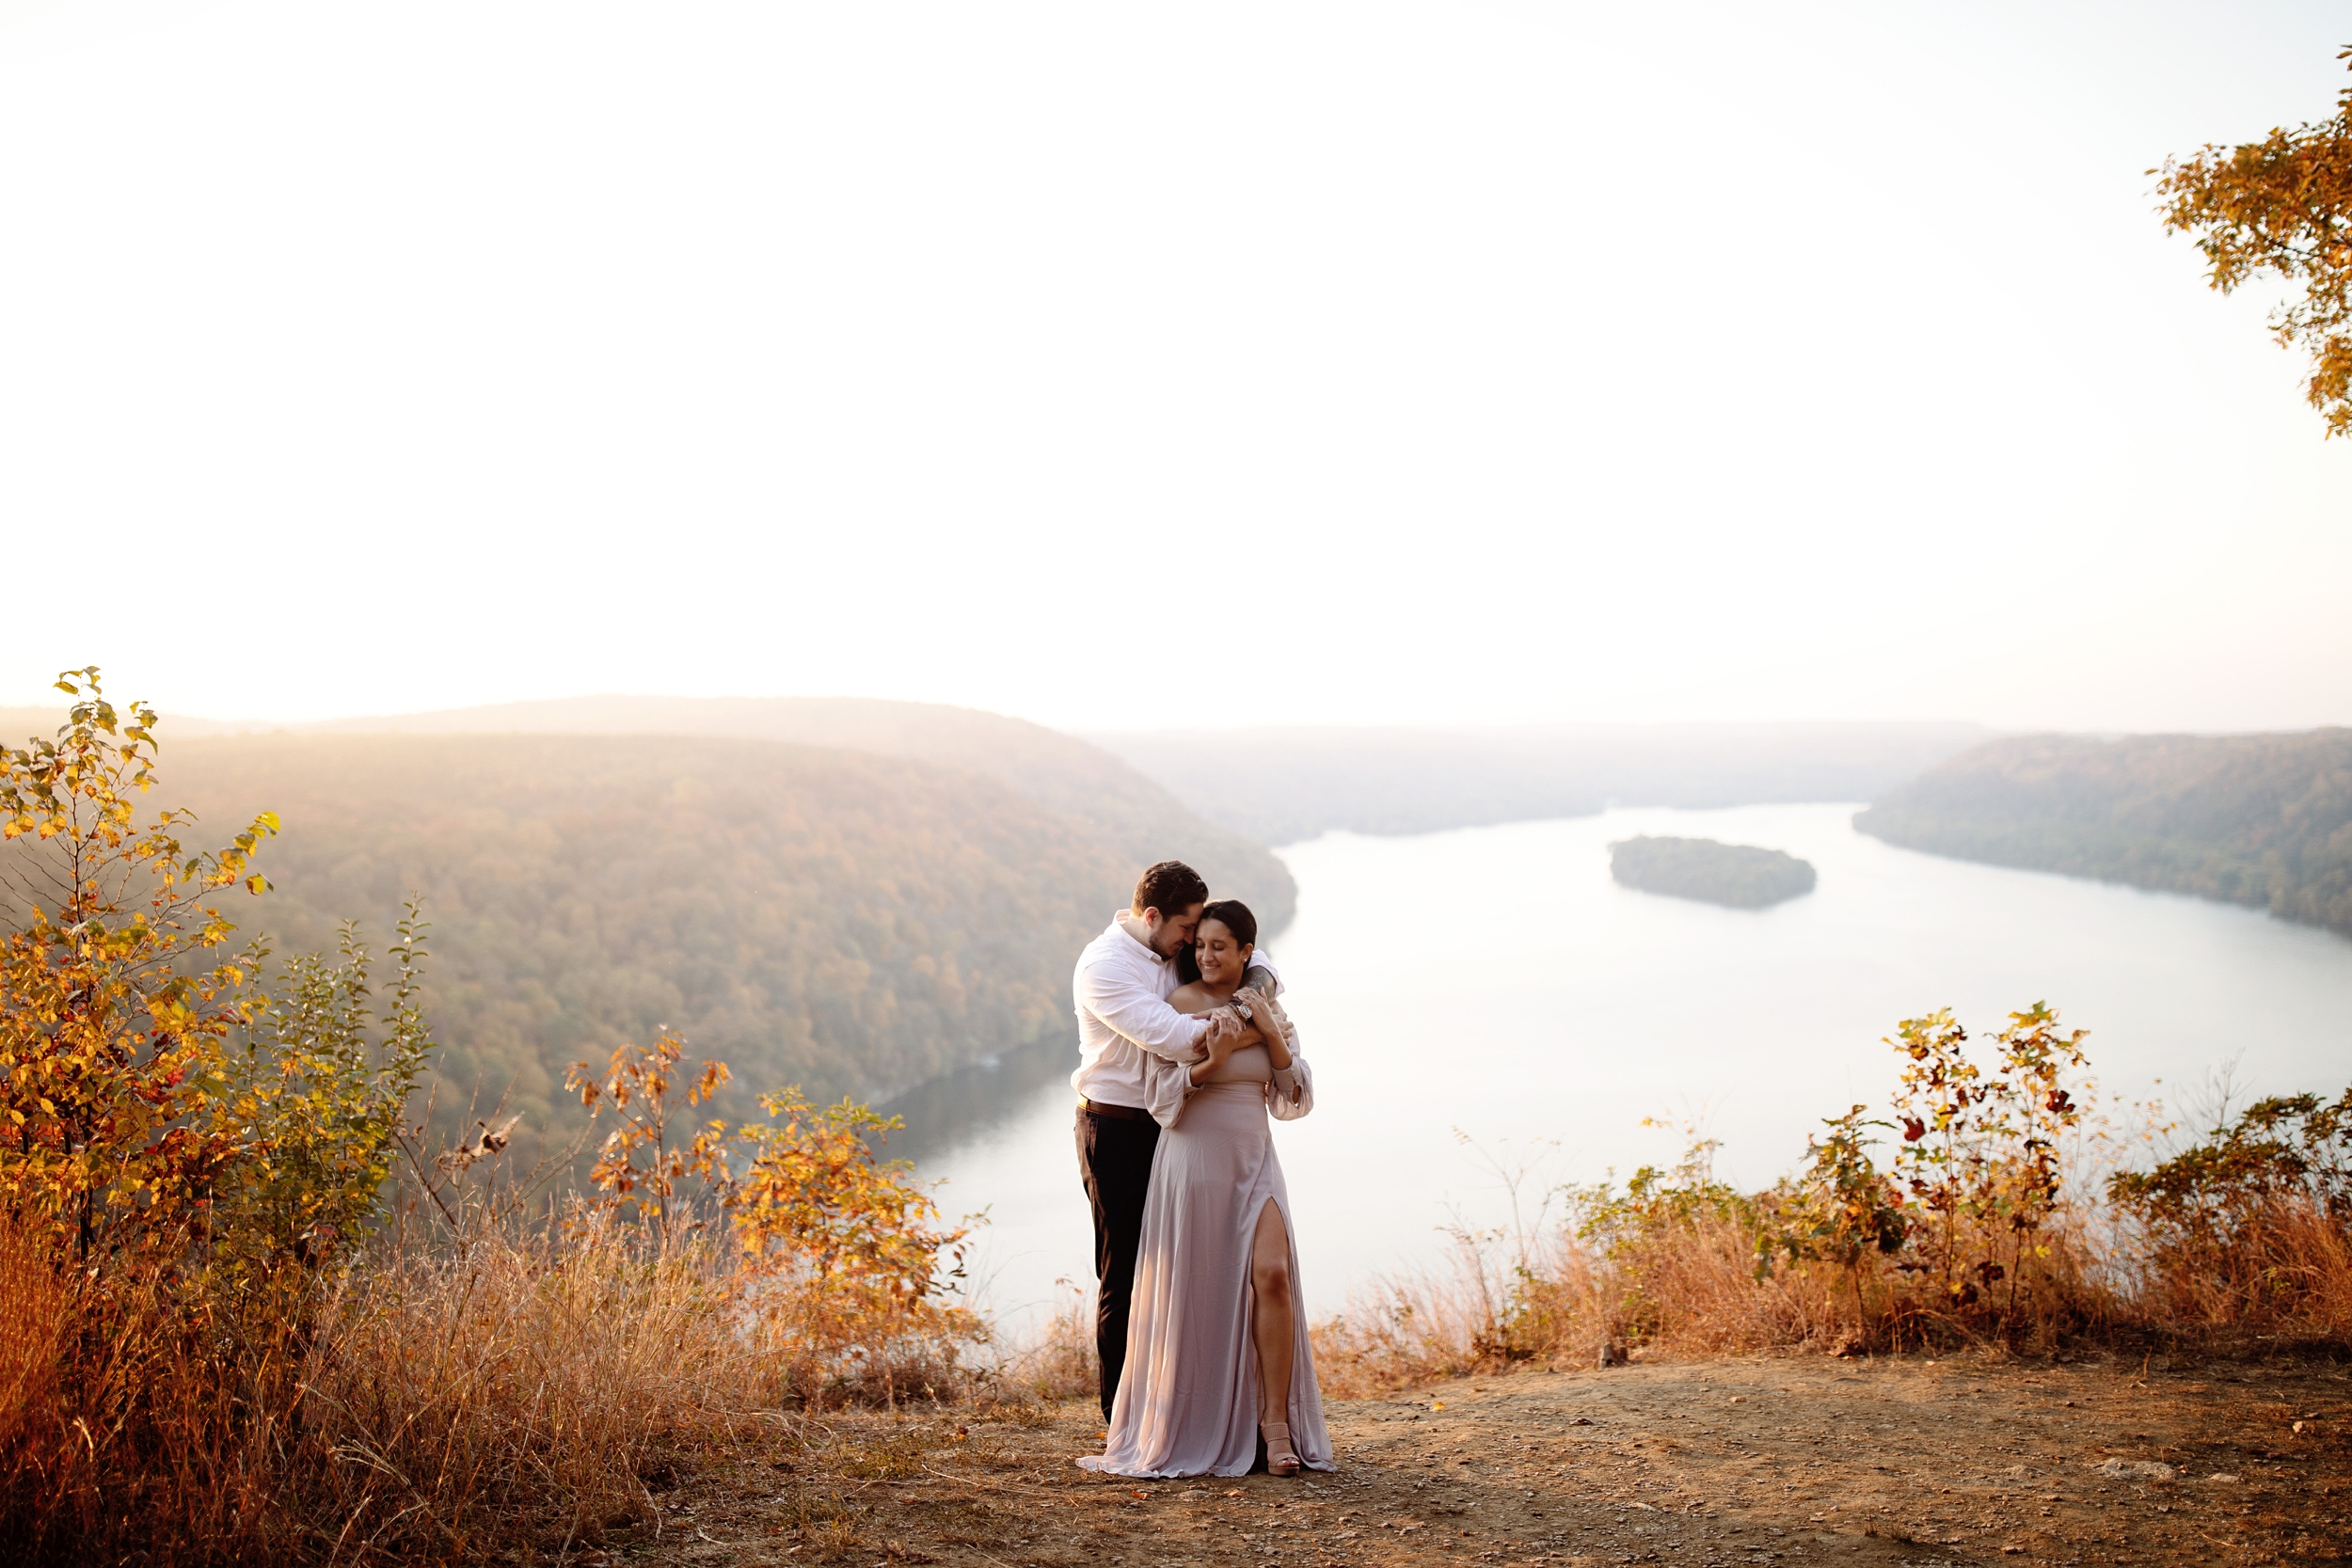 Romantic golden hour engagement photo session at The Pinnacle Overlook in Lancaster, PA. River overlook with bride wearing an off the shoulder lavender gown.